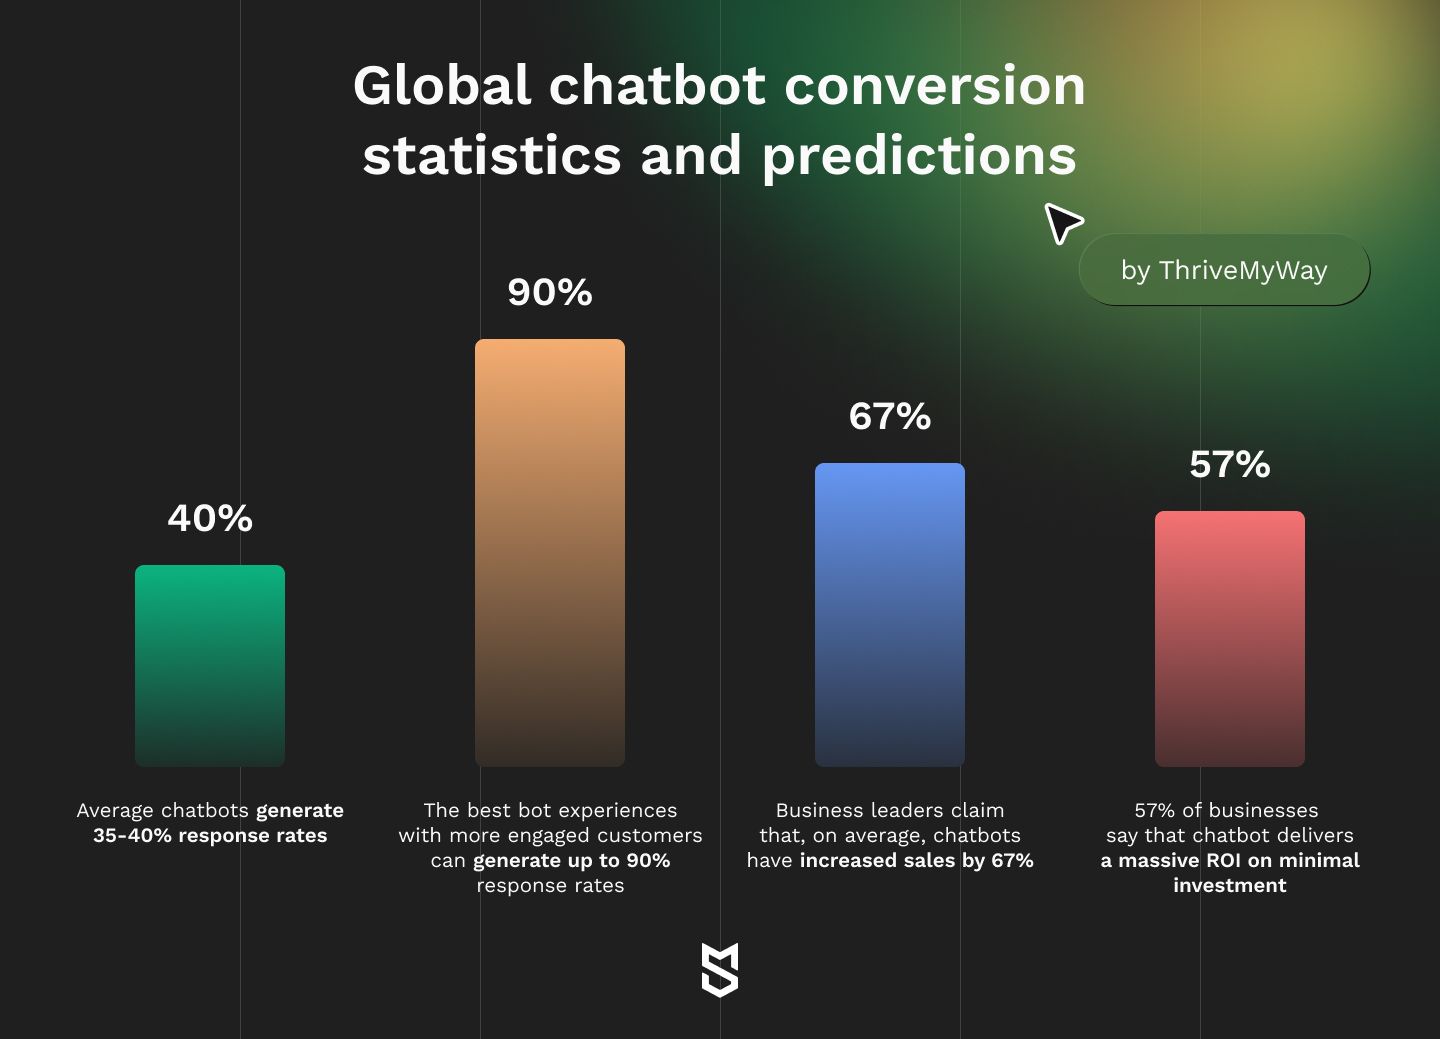 Global chatbot conversion statistics and predictions by Thrive my way